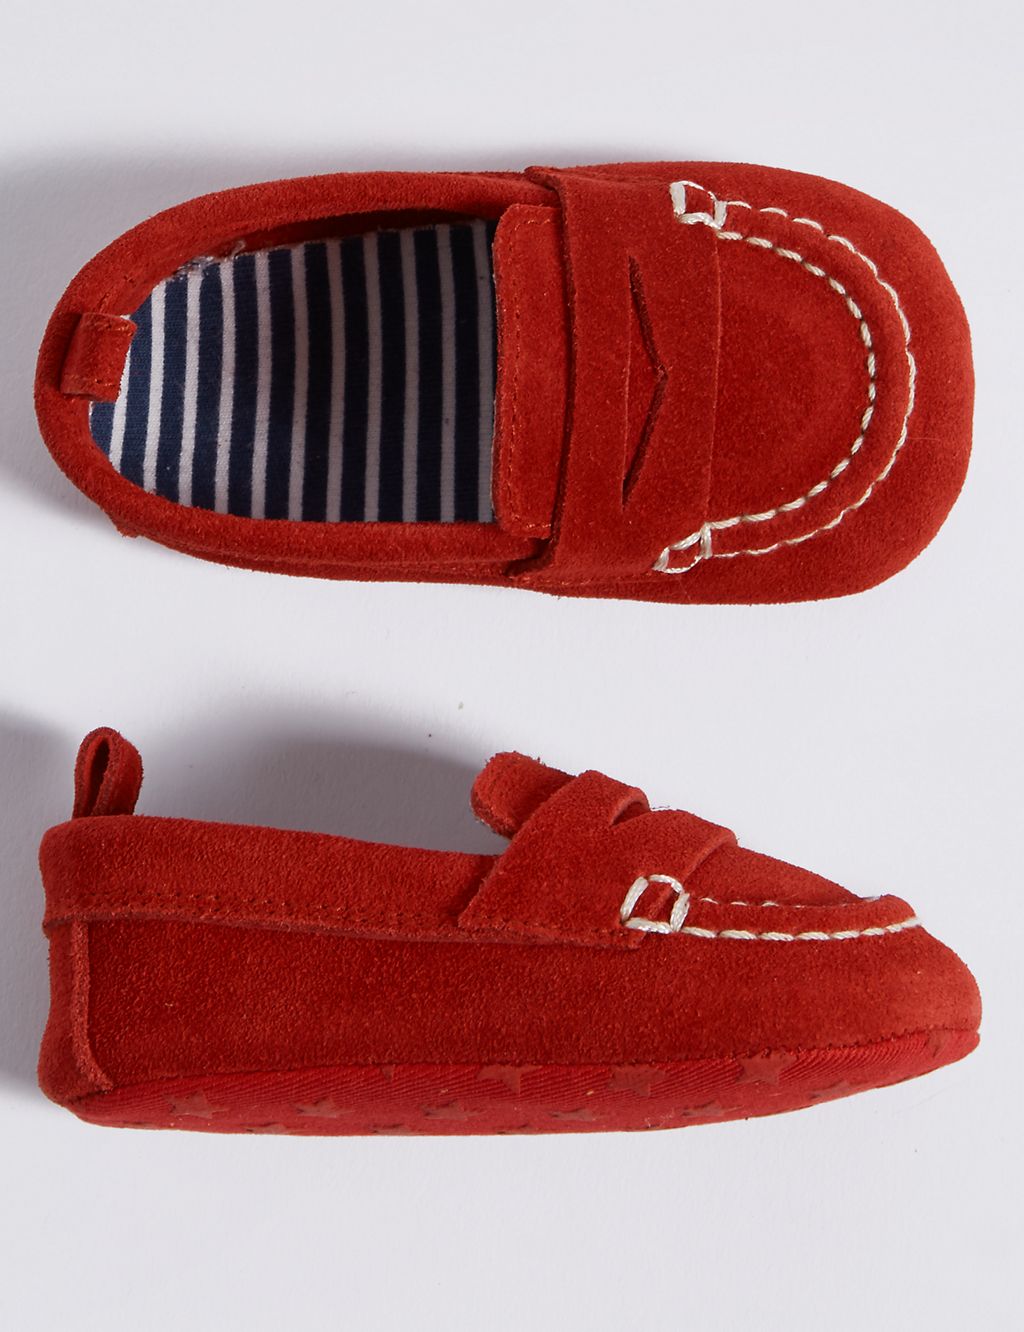 Baby Suede Loafer Pram Shoes 1 of 4